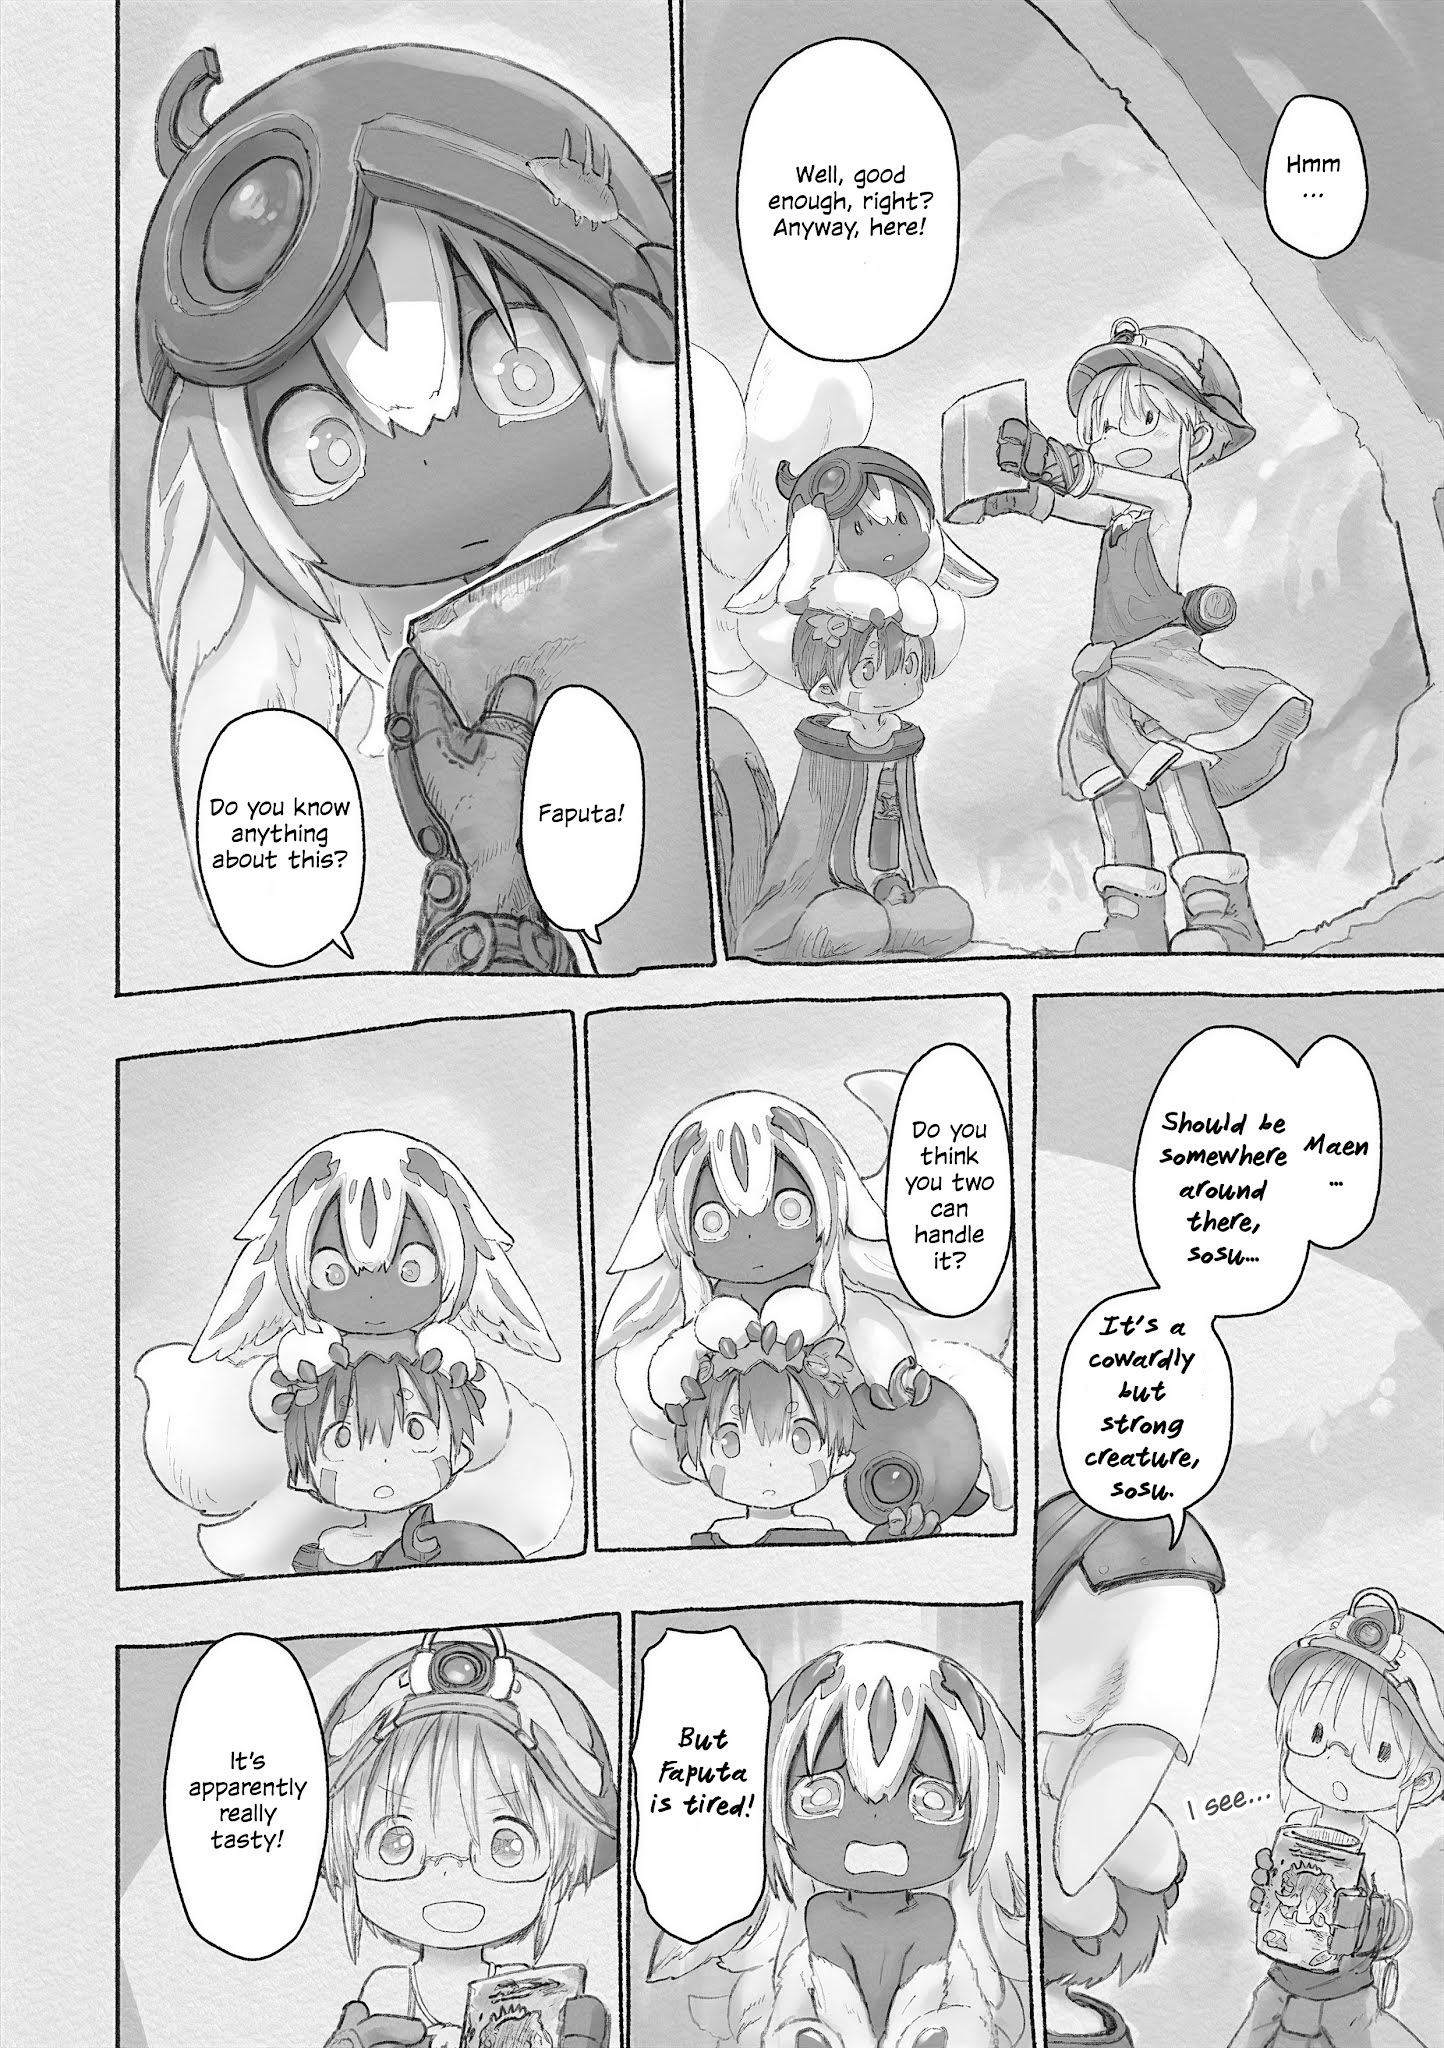 Made in Abyss Chapter 061, Made in Abyss Wiki